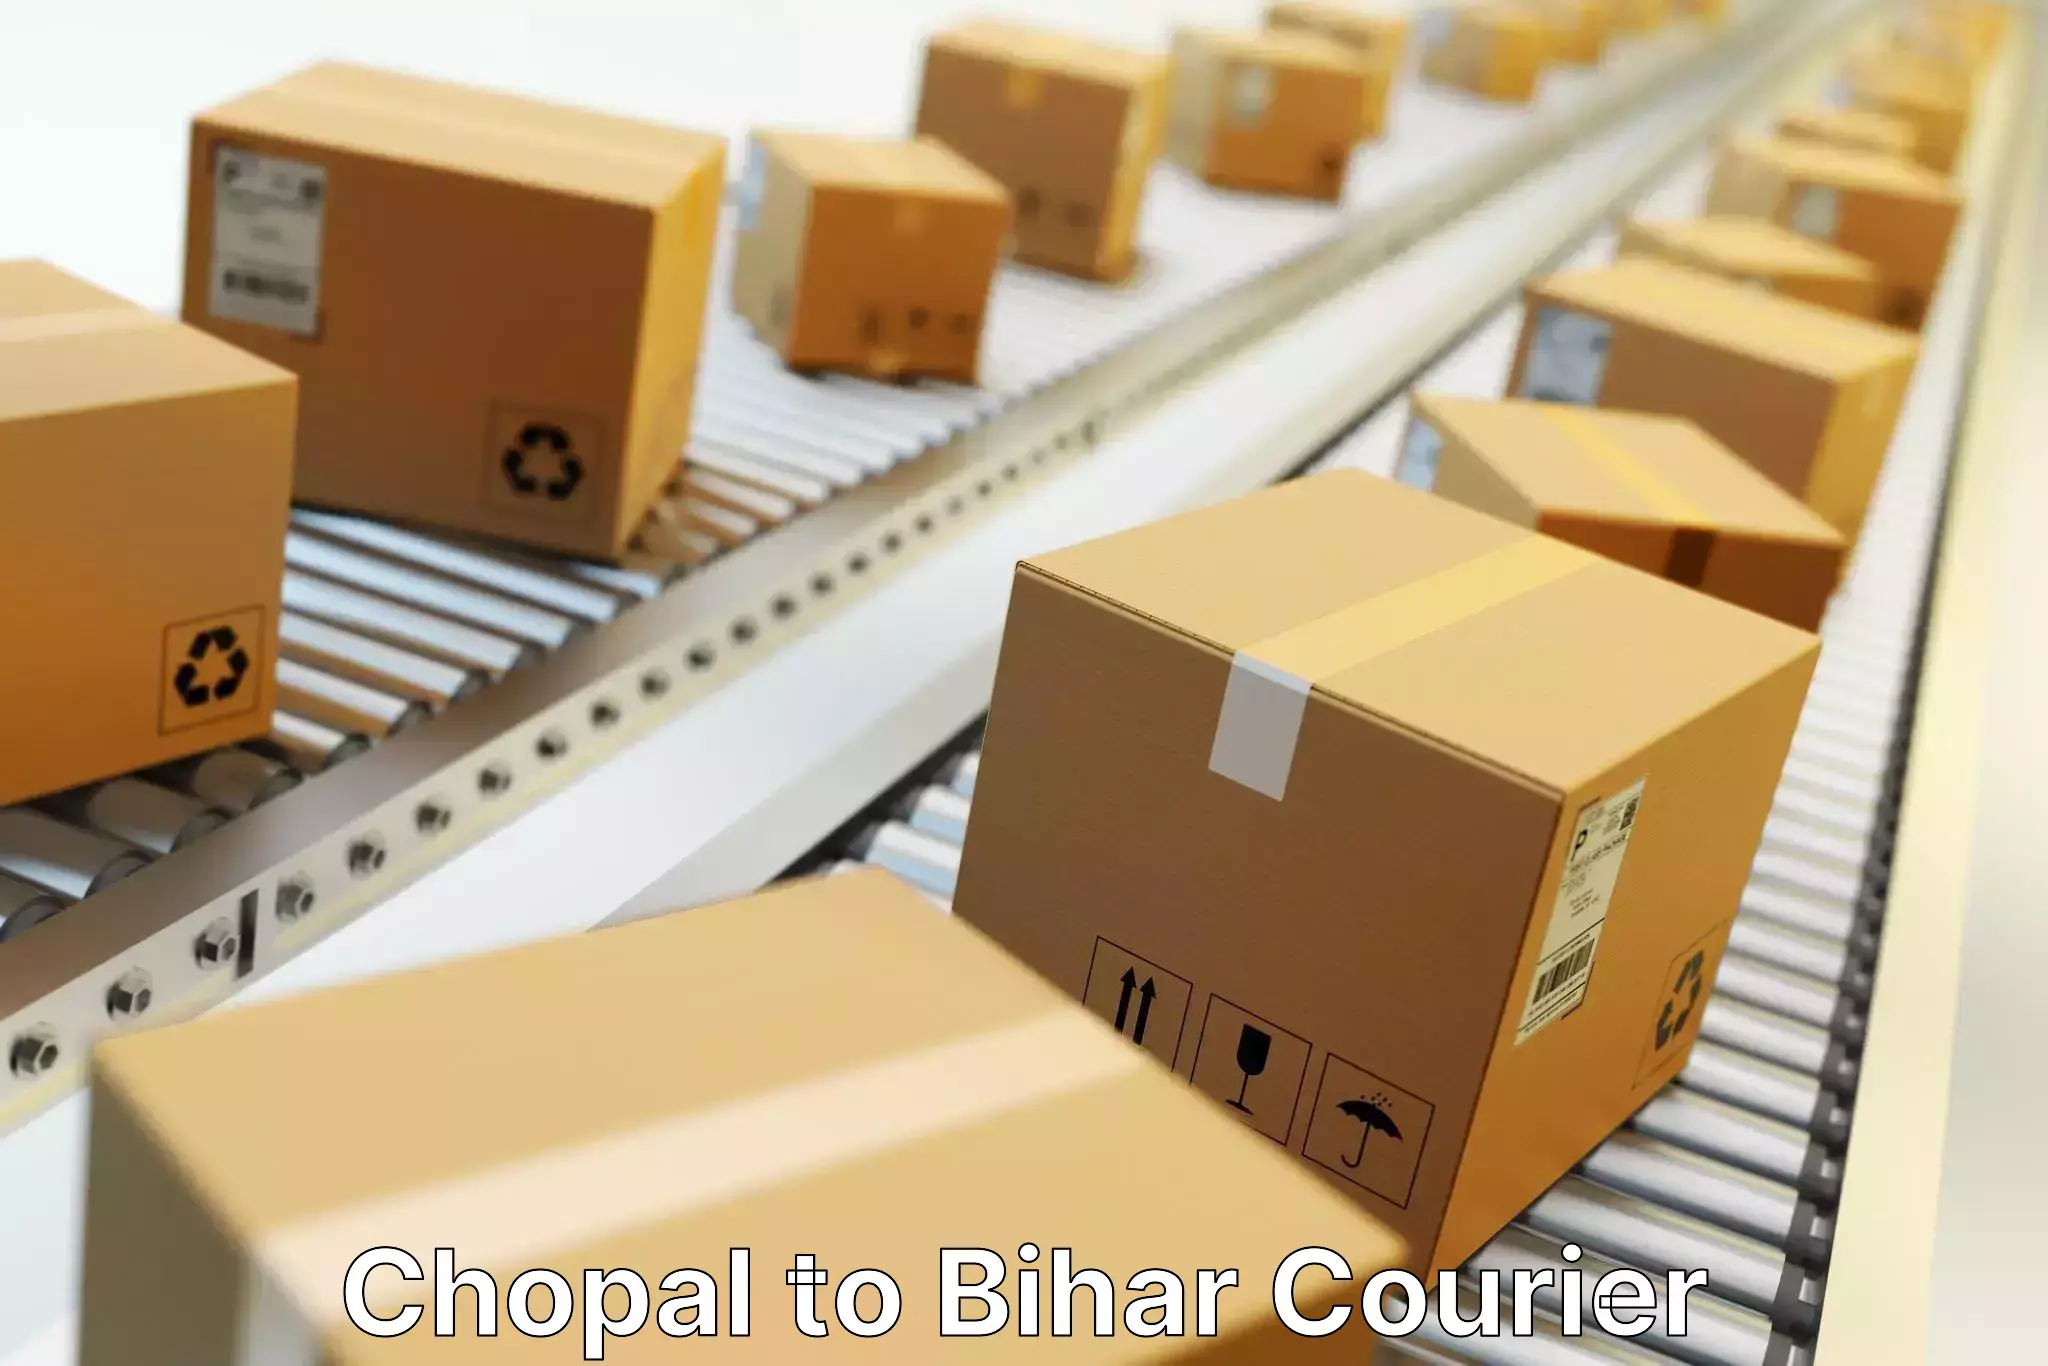 Same-day delivery solutions Chopal to Bihar